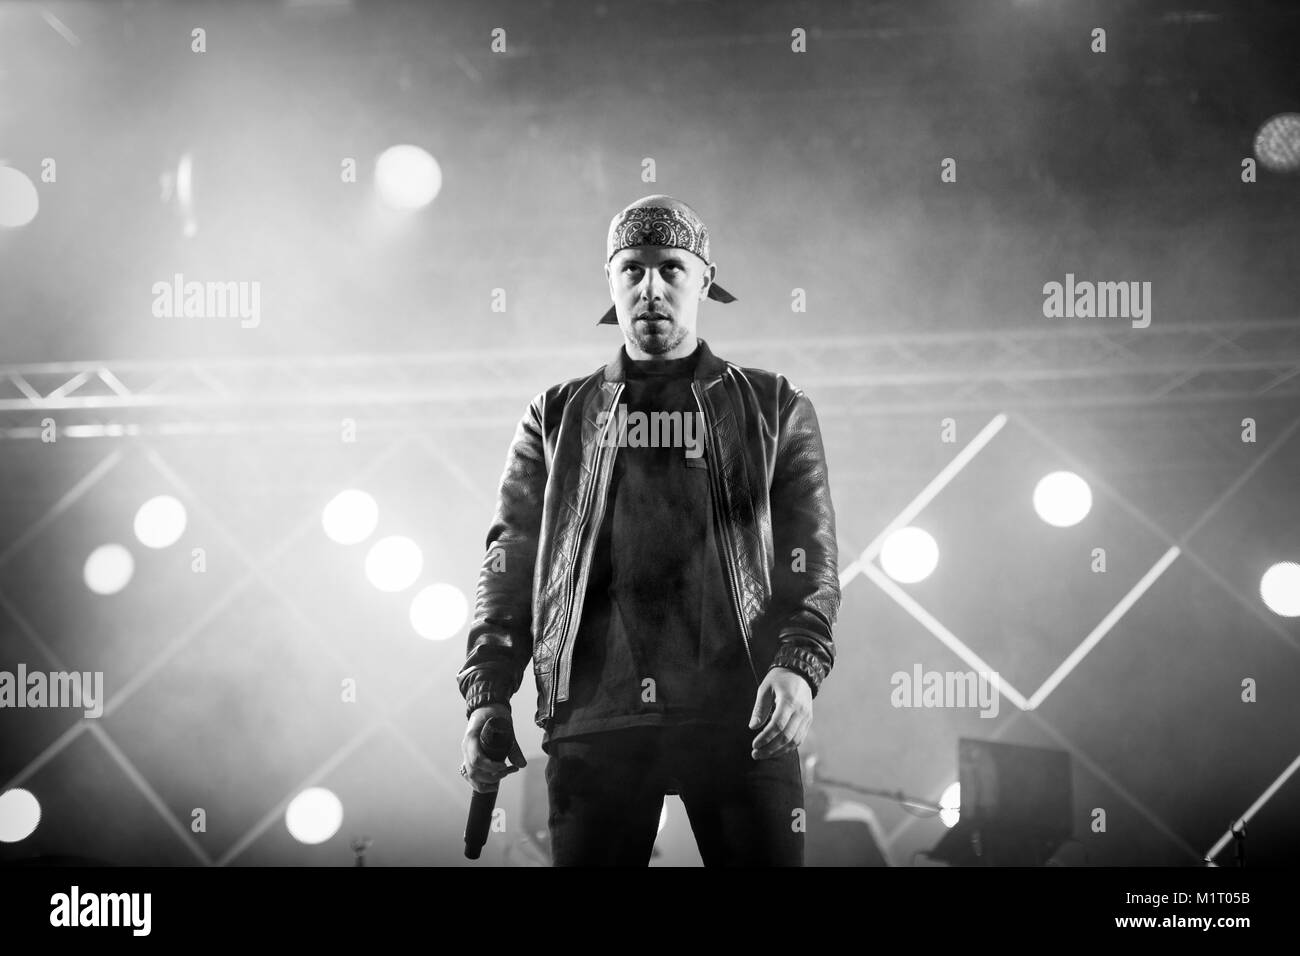 Norway, Bergen – June 16, 2017. The Norwegian rap duo Karpe Diem performs a live concert during the Norwegian music festival Bergenfest 2017 in Bergen. The duo consists of the two rappers Magdi Omar Ytreeide Abdelmaguid (pictured) and Chirag Rashmikant Patel. Stock Photo